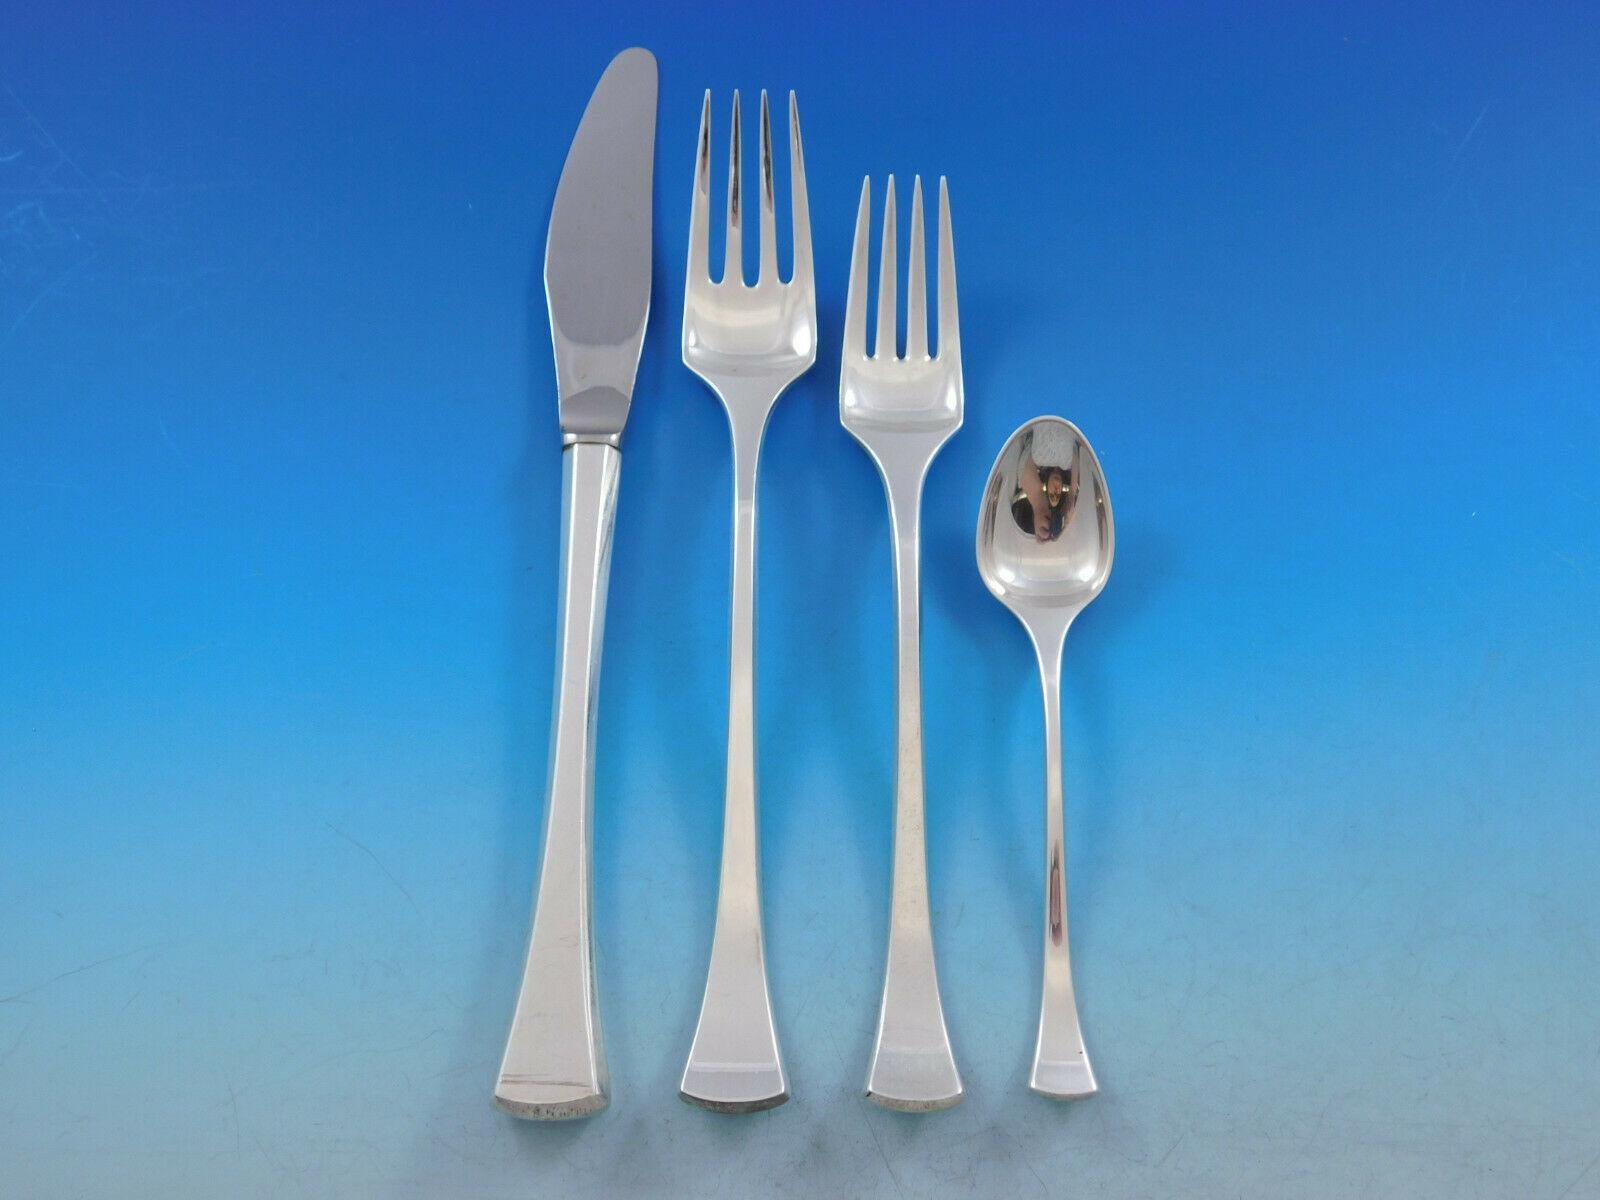 Mid-Century Modern Kristine by Hans Hansen Danish sterling silver flatware set, 41 pieces. This set includes:

8 dinner knives, long handle, 8 5/8